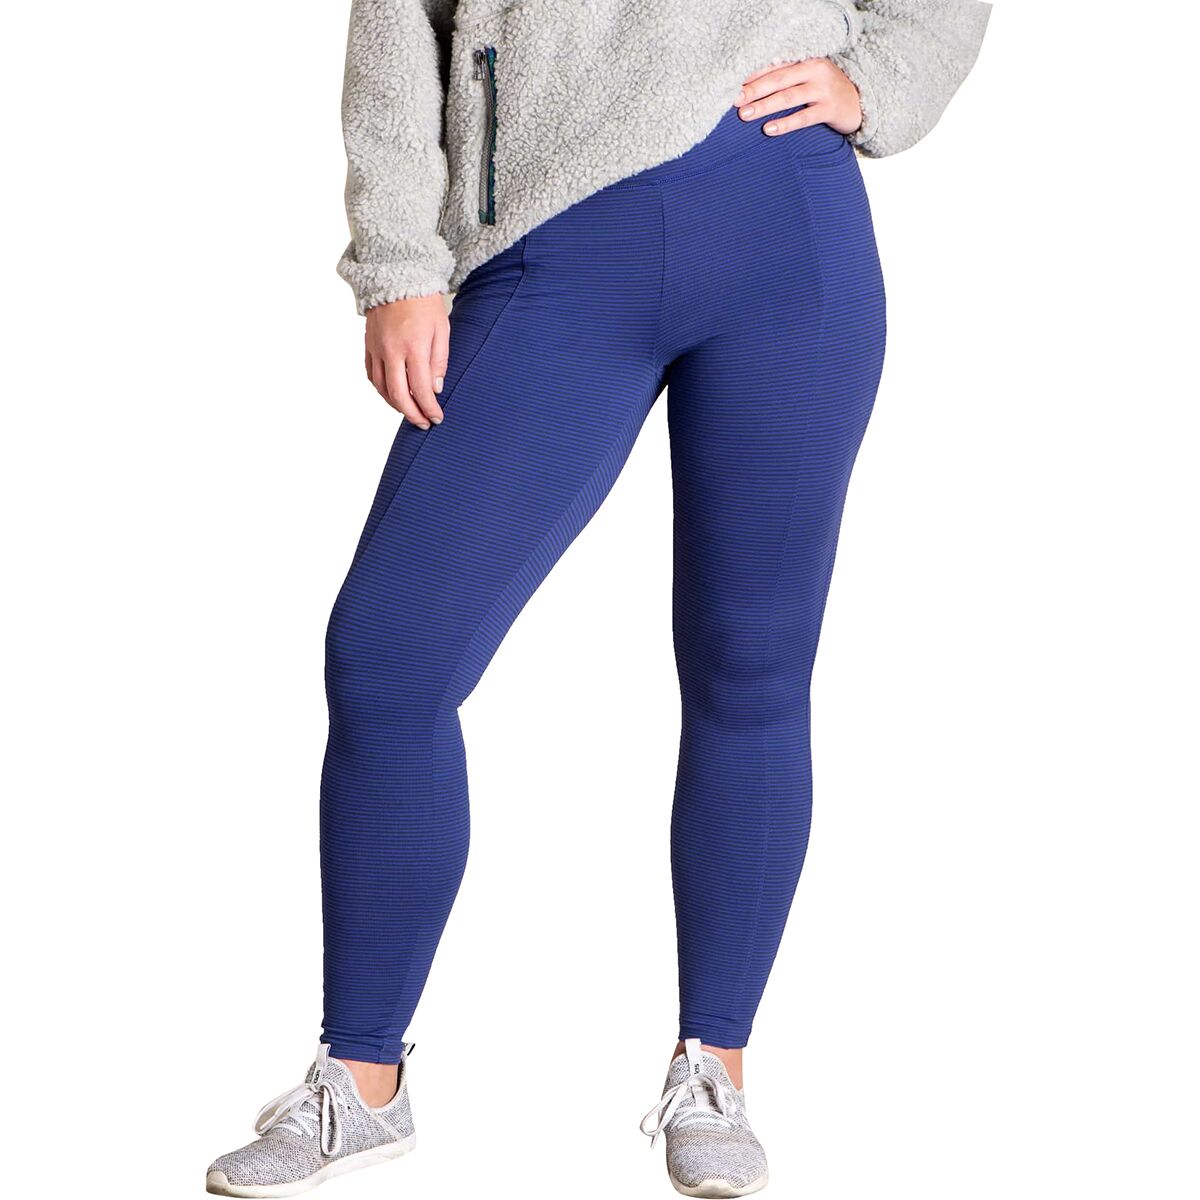 Toad&Co Timehop Light Tight - Women's